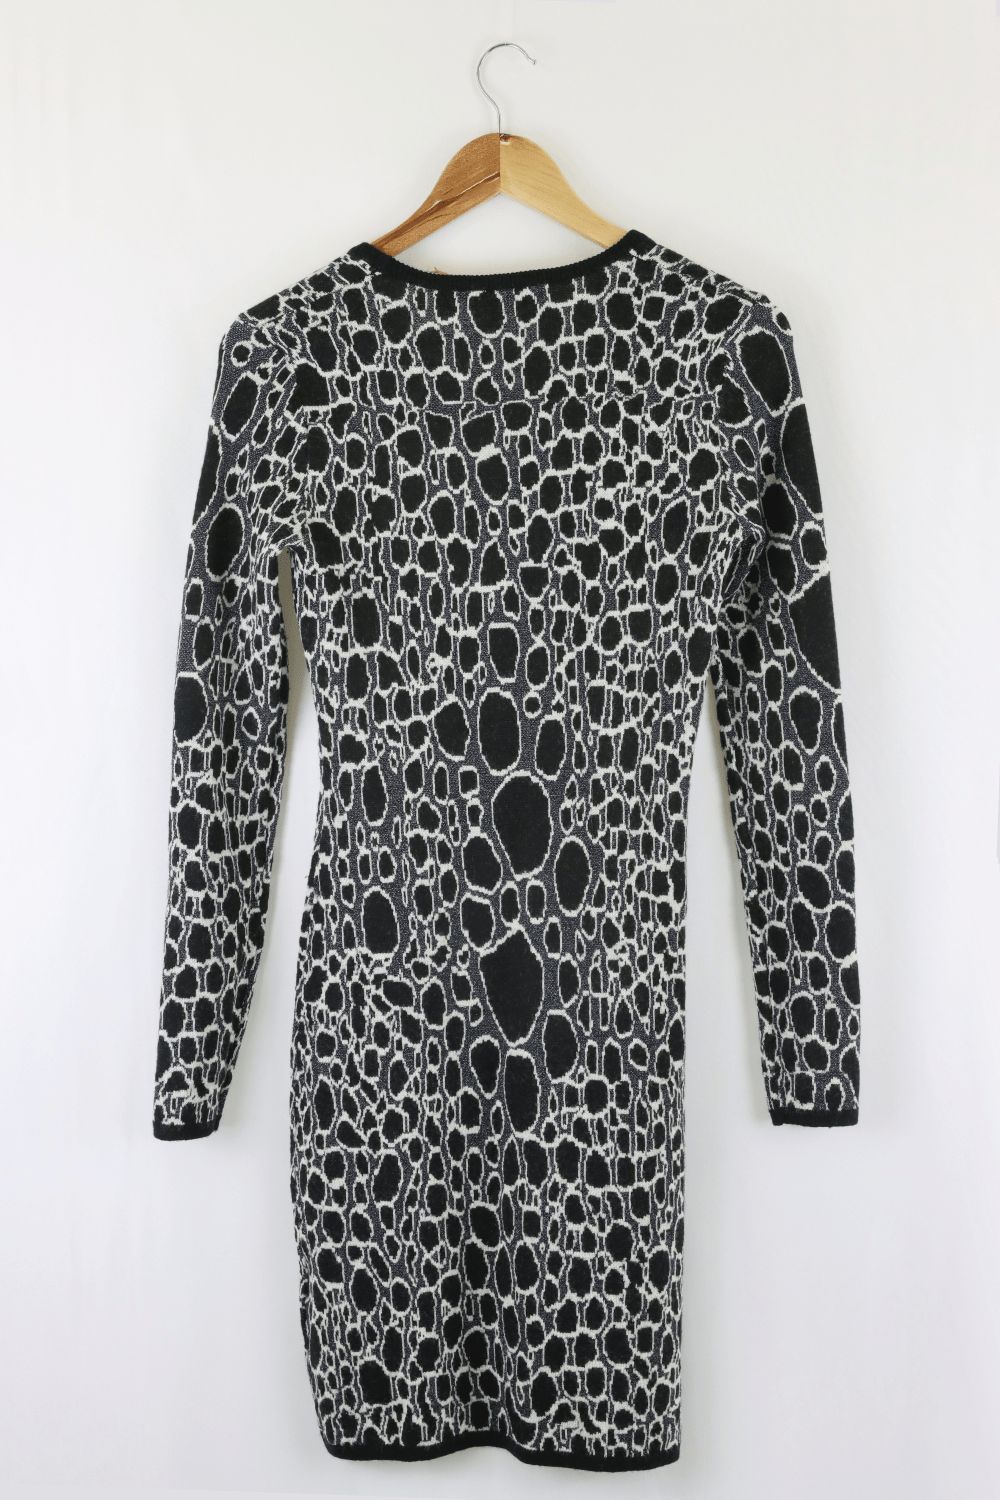 French Connections Black And White Pattern Dress 10